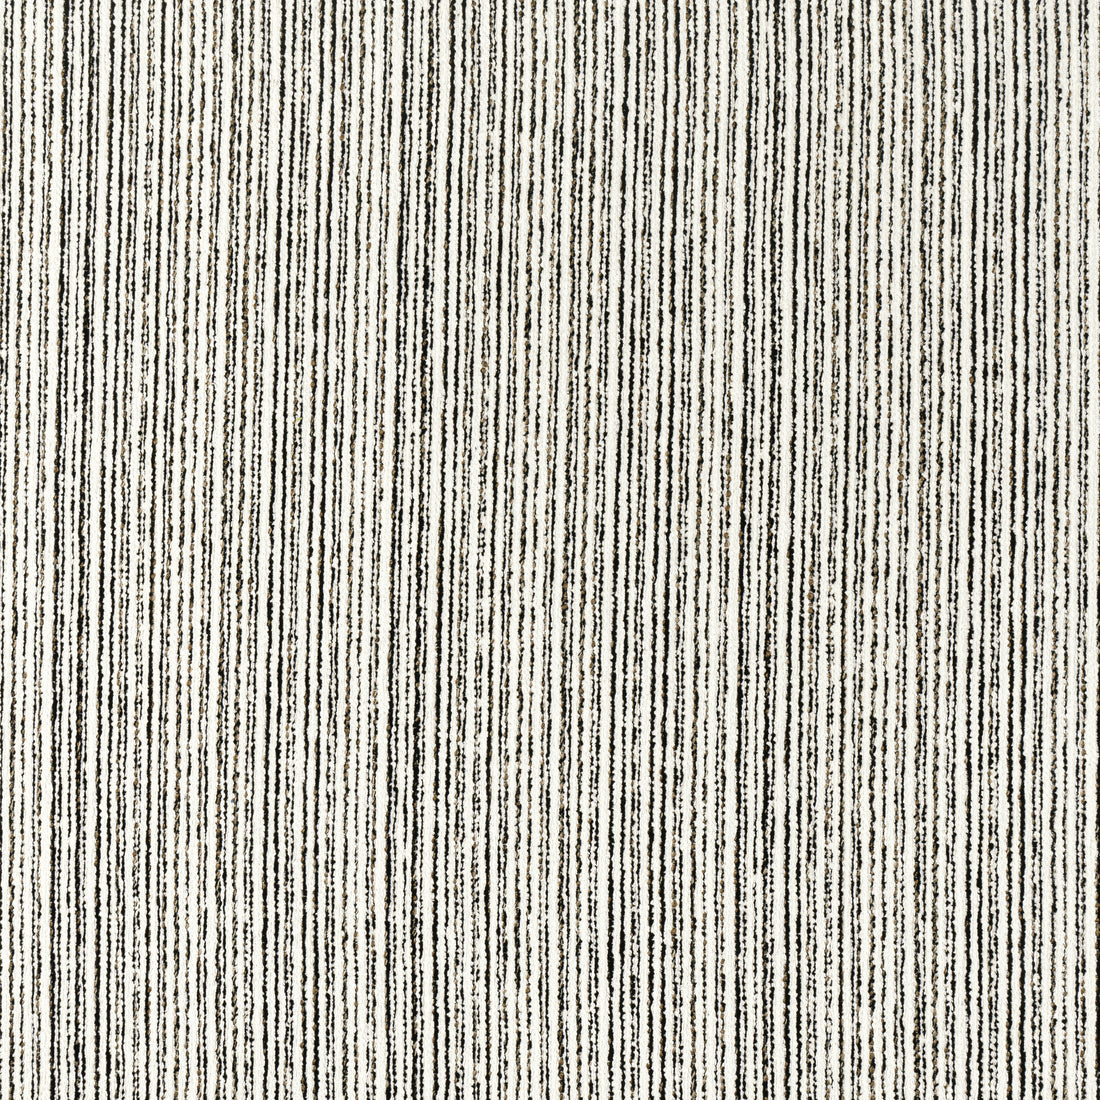 Zia Stripe fabric in ebony color - pattern number W8807 - by Thibaut in the Haven collection